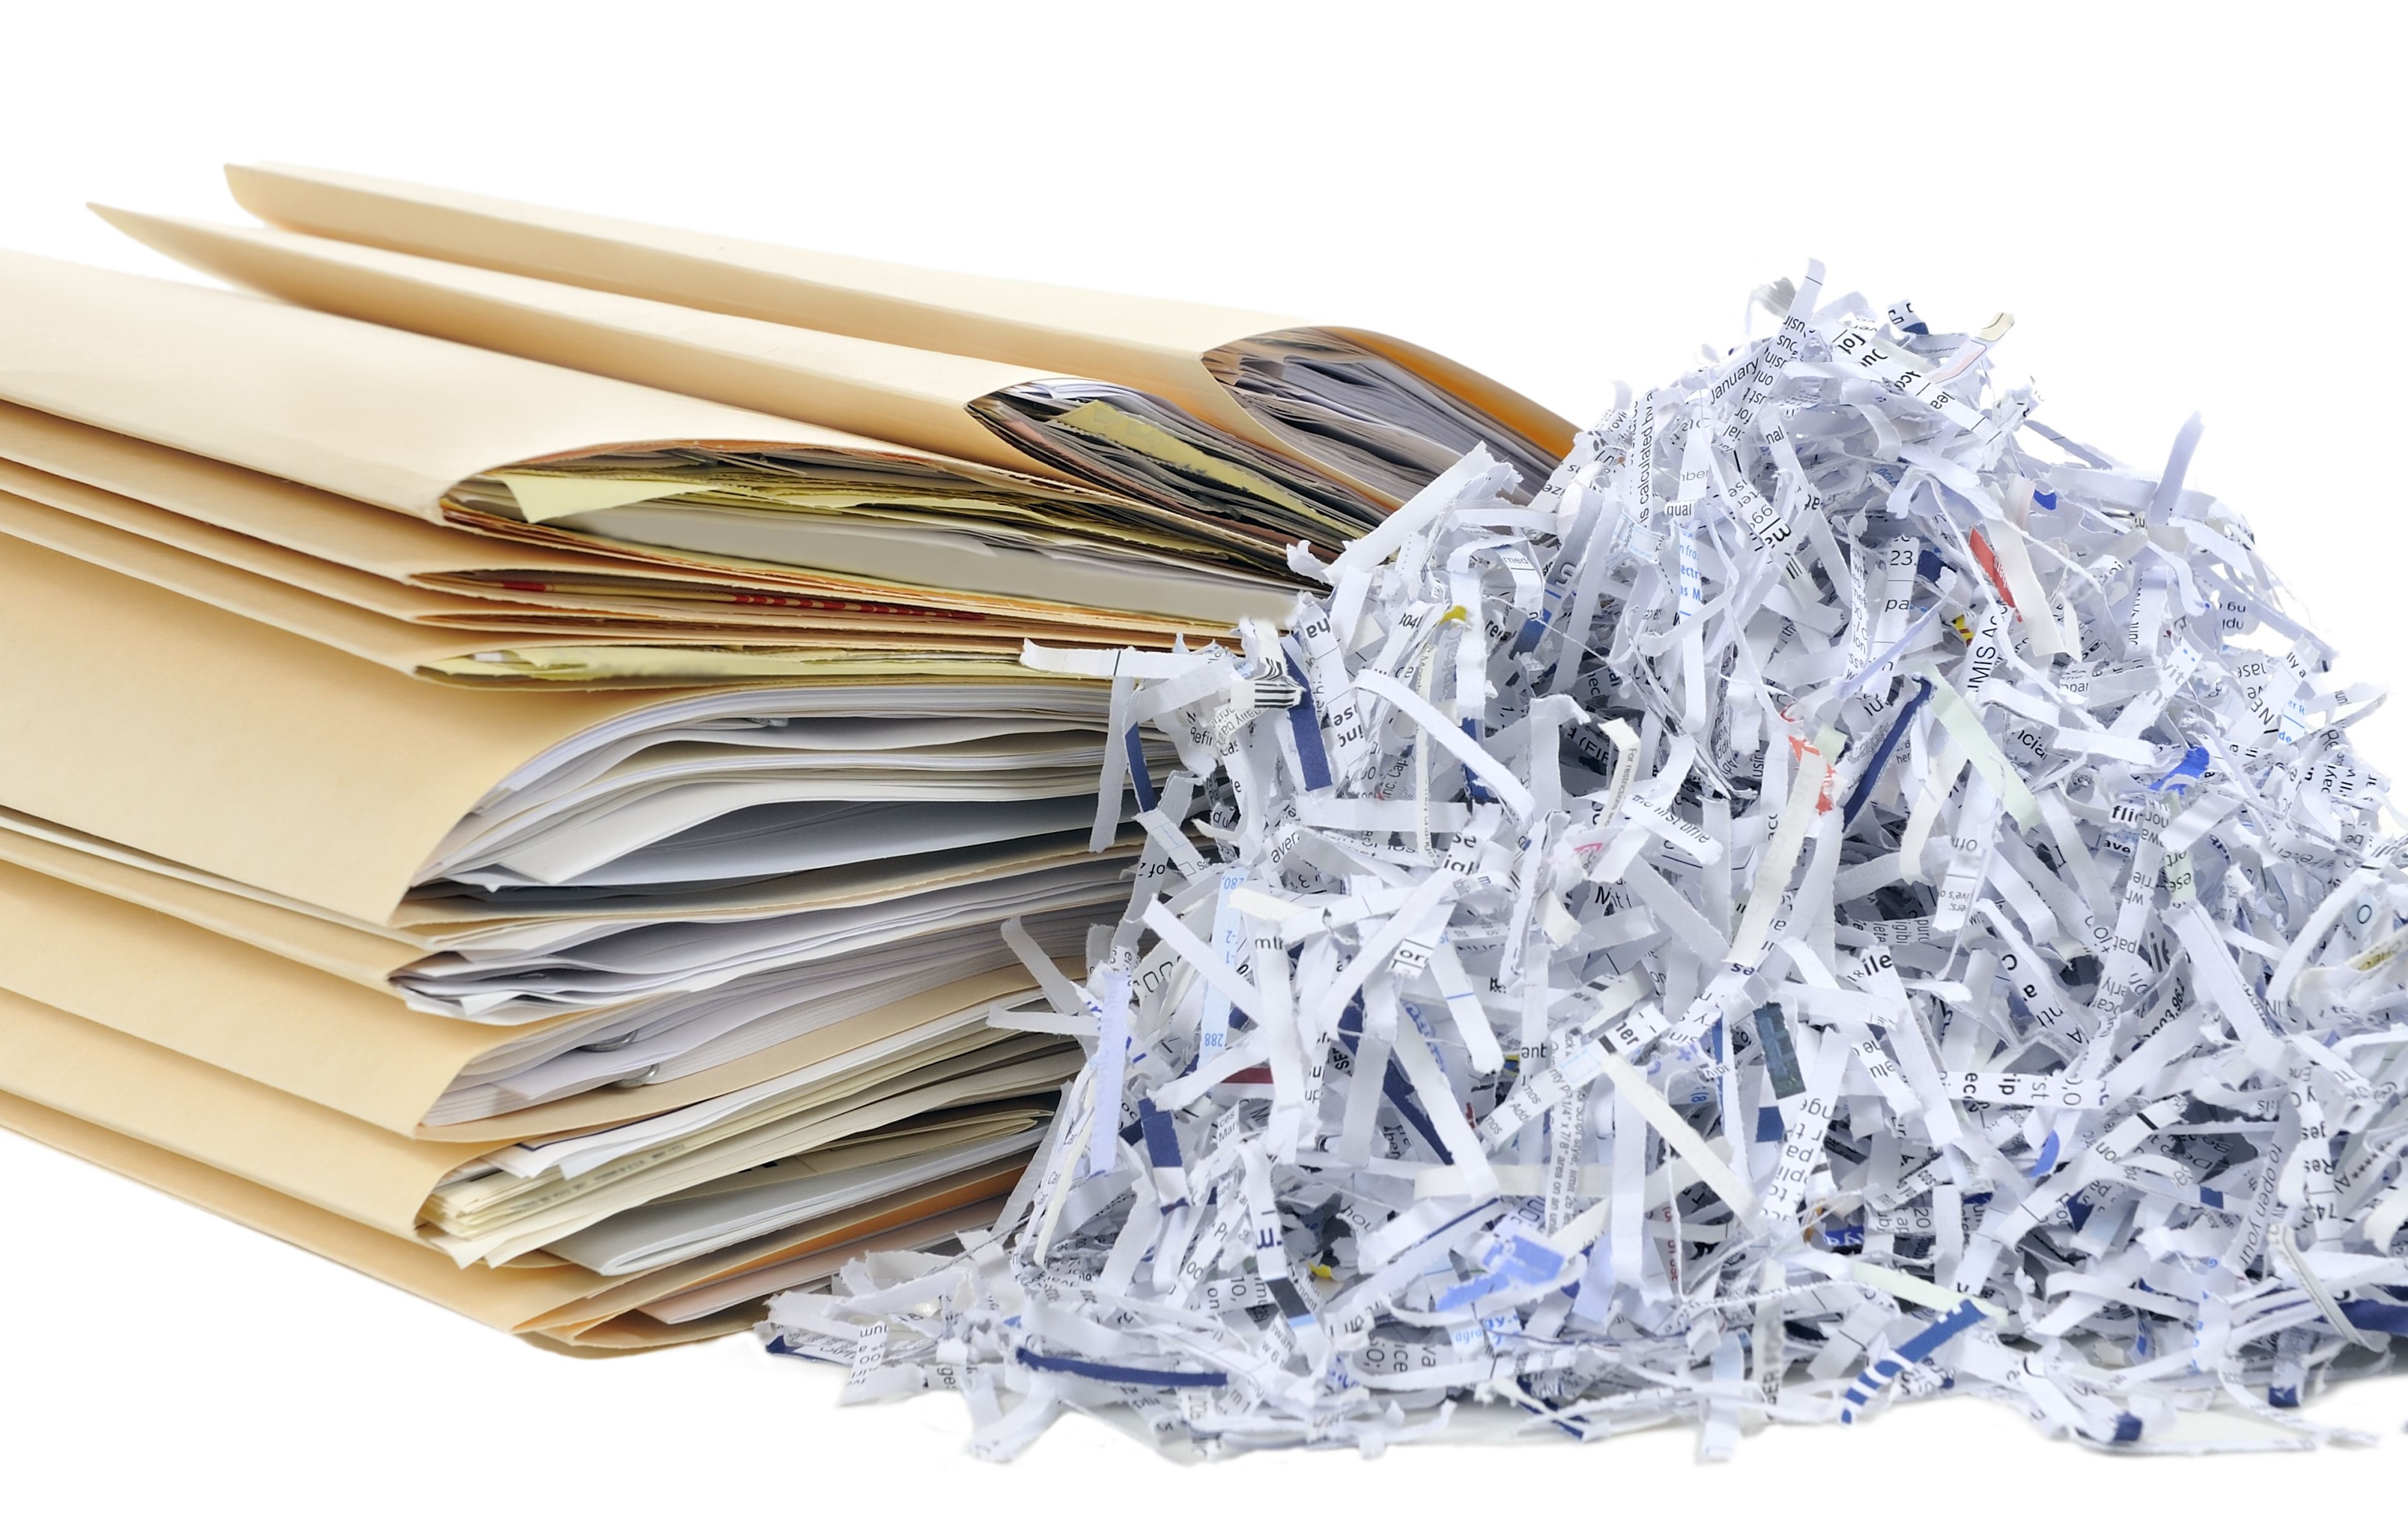 stack of documents in file folders, shredded paper pile